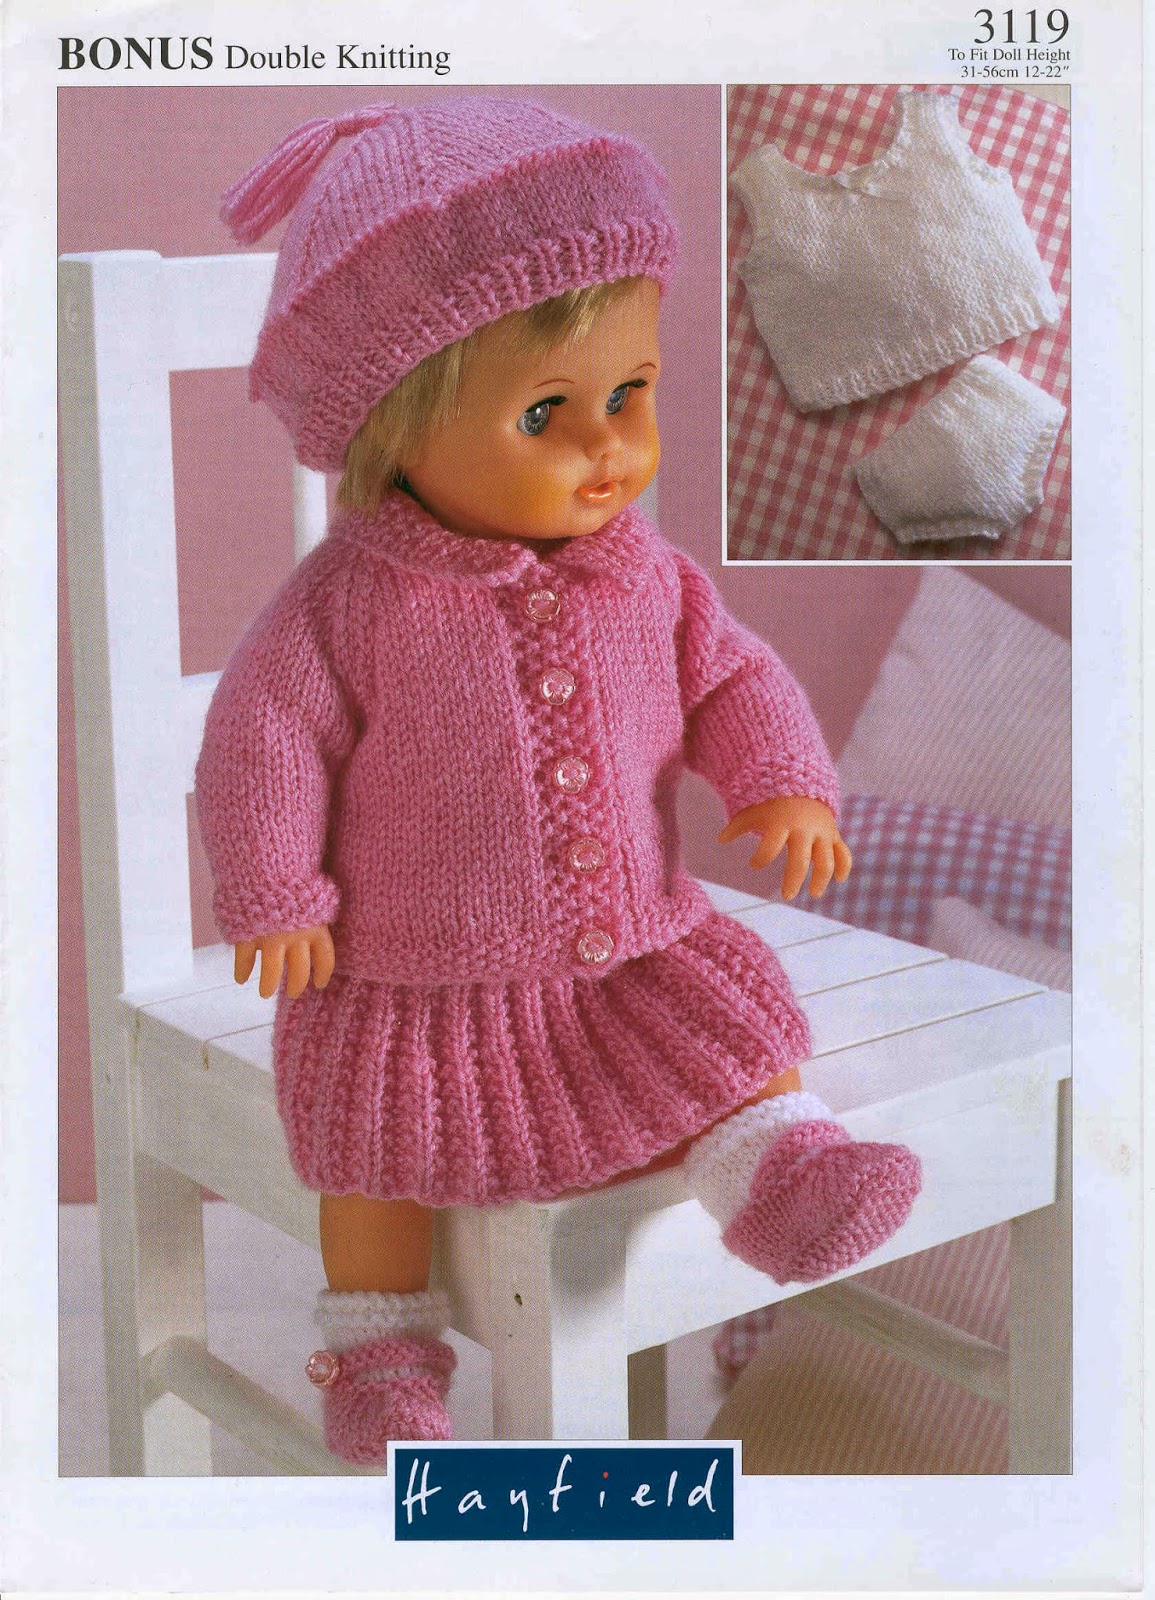 herbie-s-doll-sewing-knitting-crochet-pattern-collection-vintage